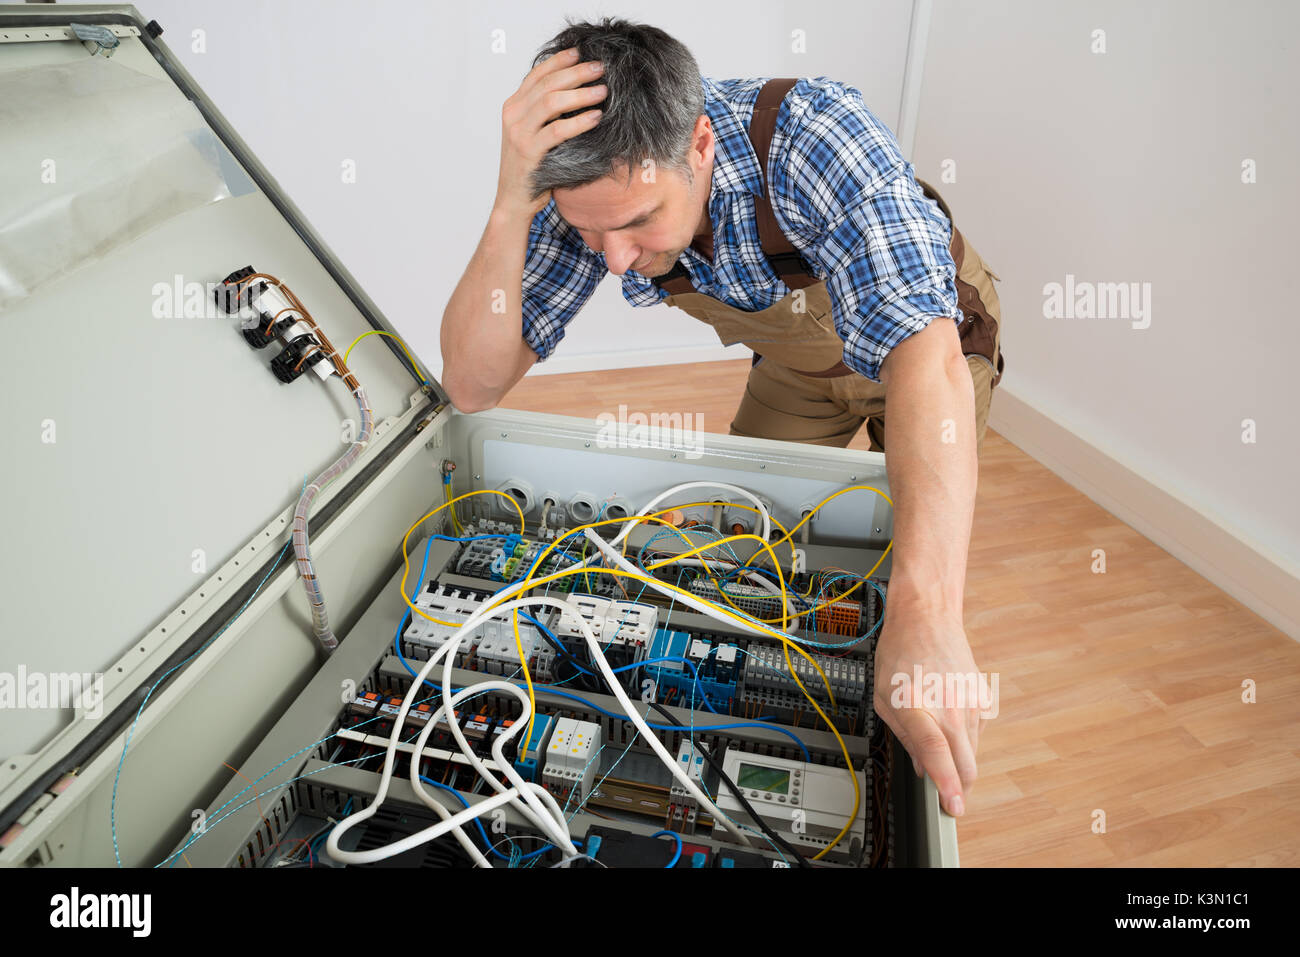 Portrait Of A Confused Electrician Looking At Fuse Box Stock Photo